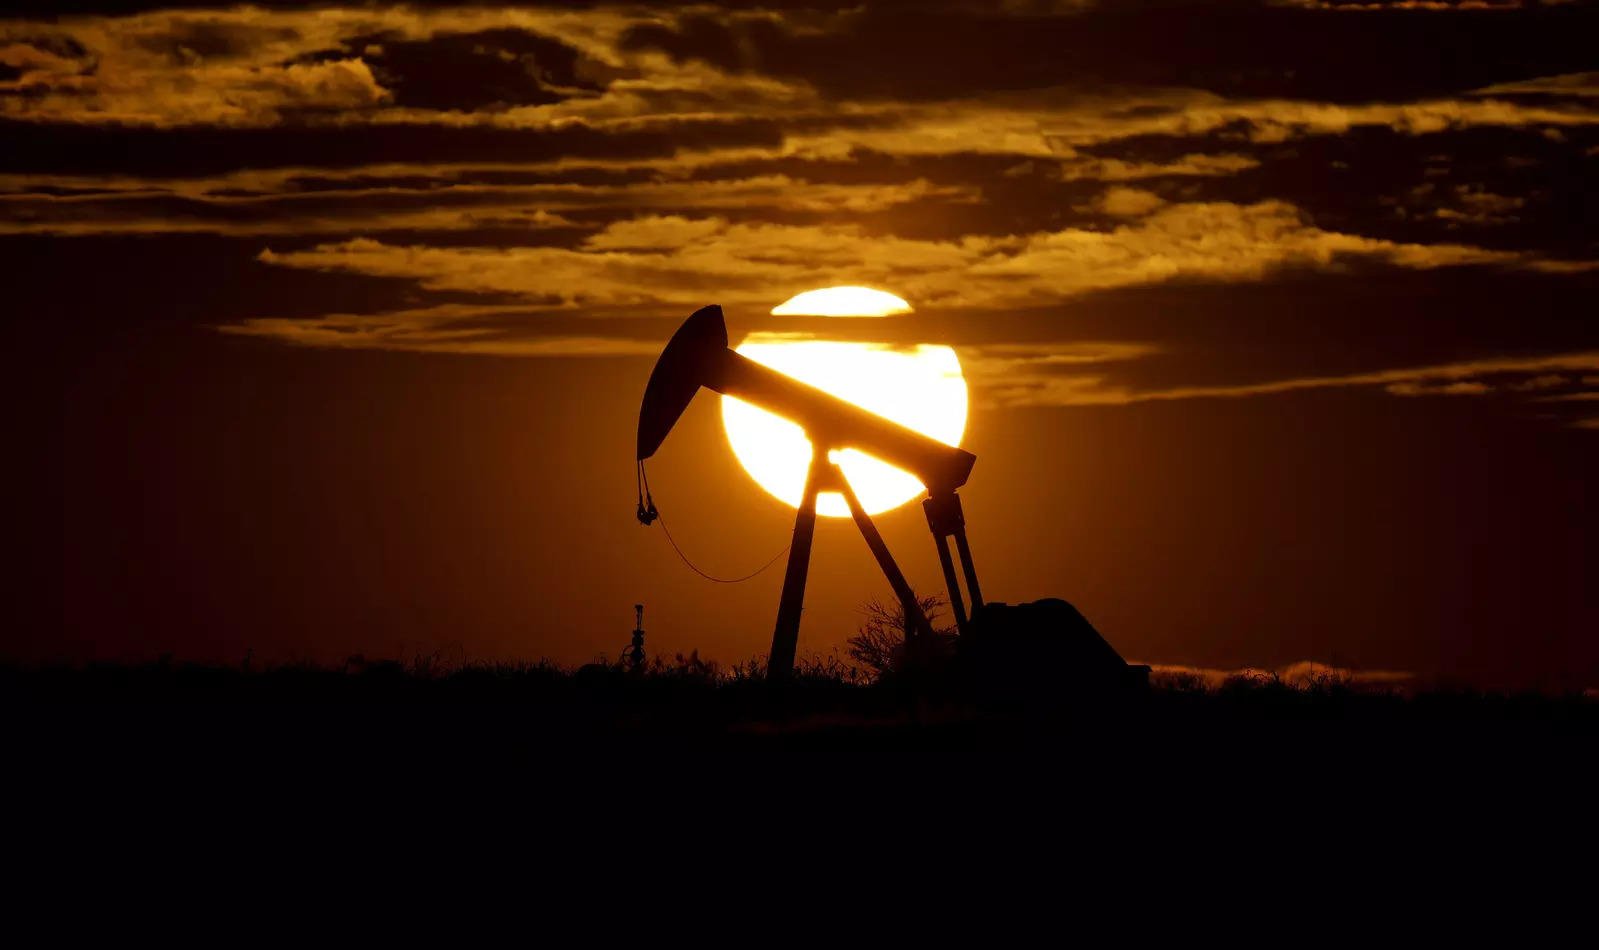     Brent oil futures fell 30 cents, or 0.4%, to $84.17 a barrel at 0150 GMT.  US West Texas Intermediate crude fell 45 cents, or 0.6%, to $81.67 a barrel.